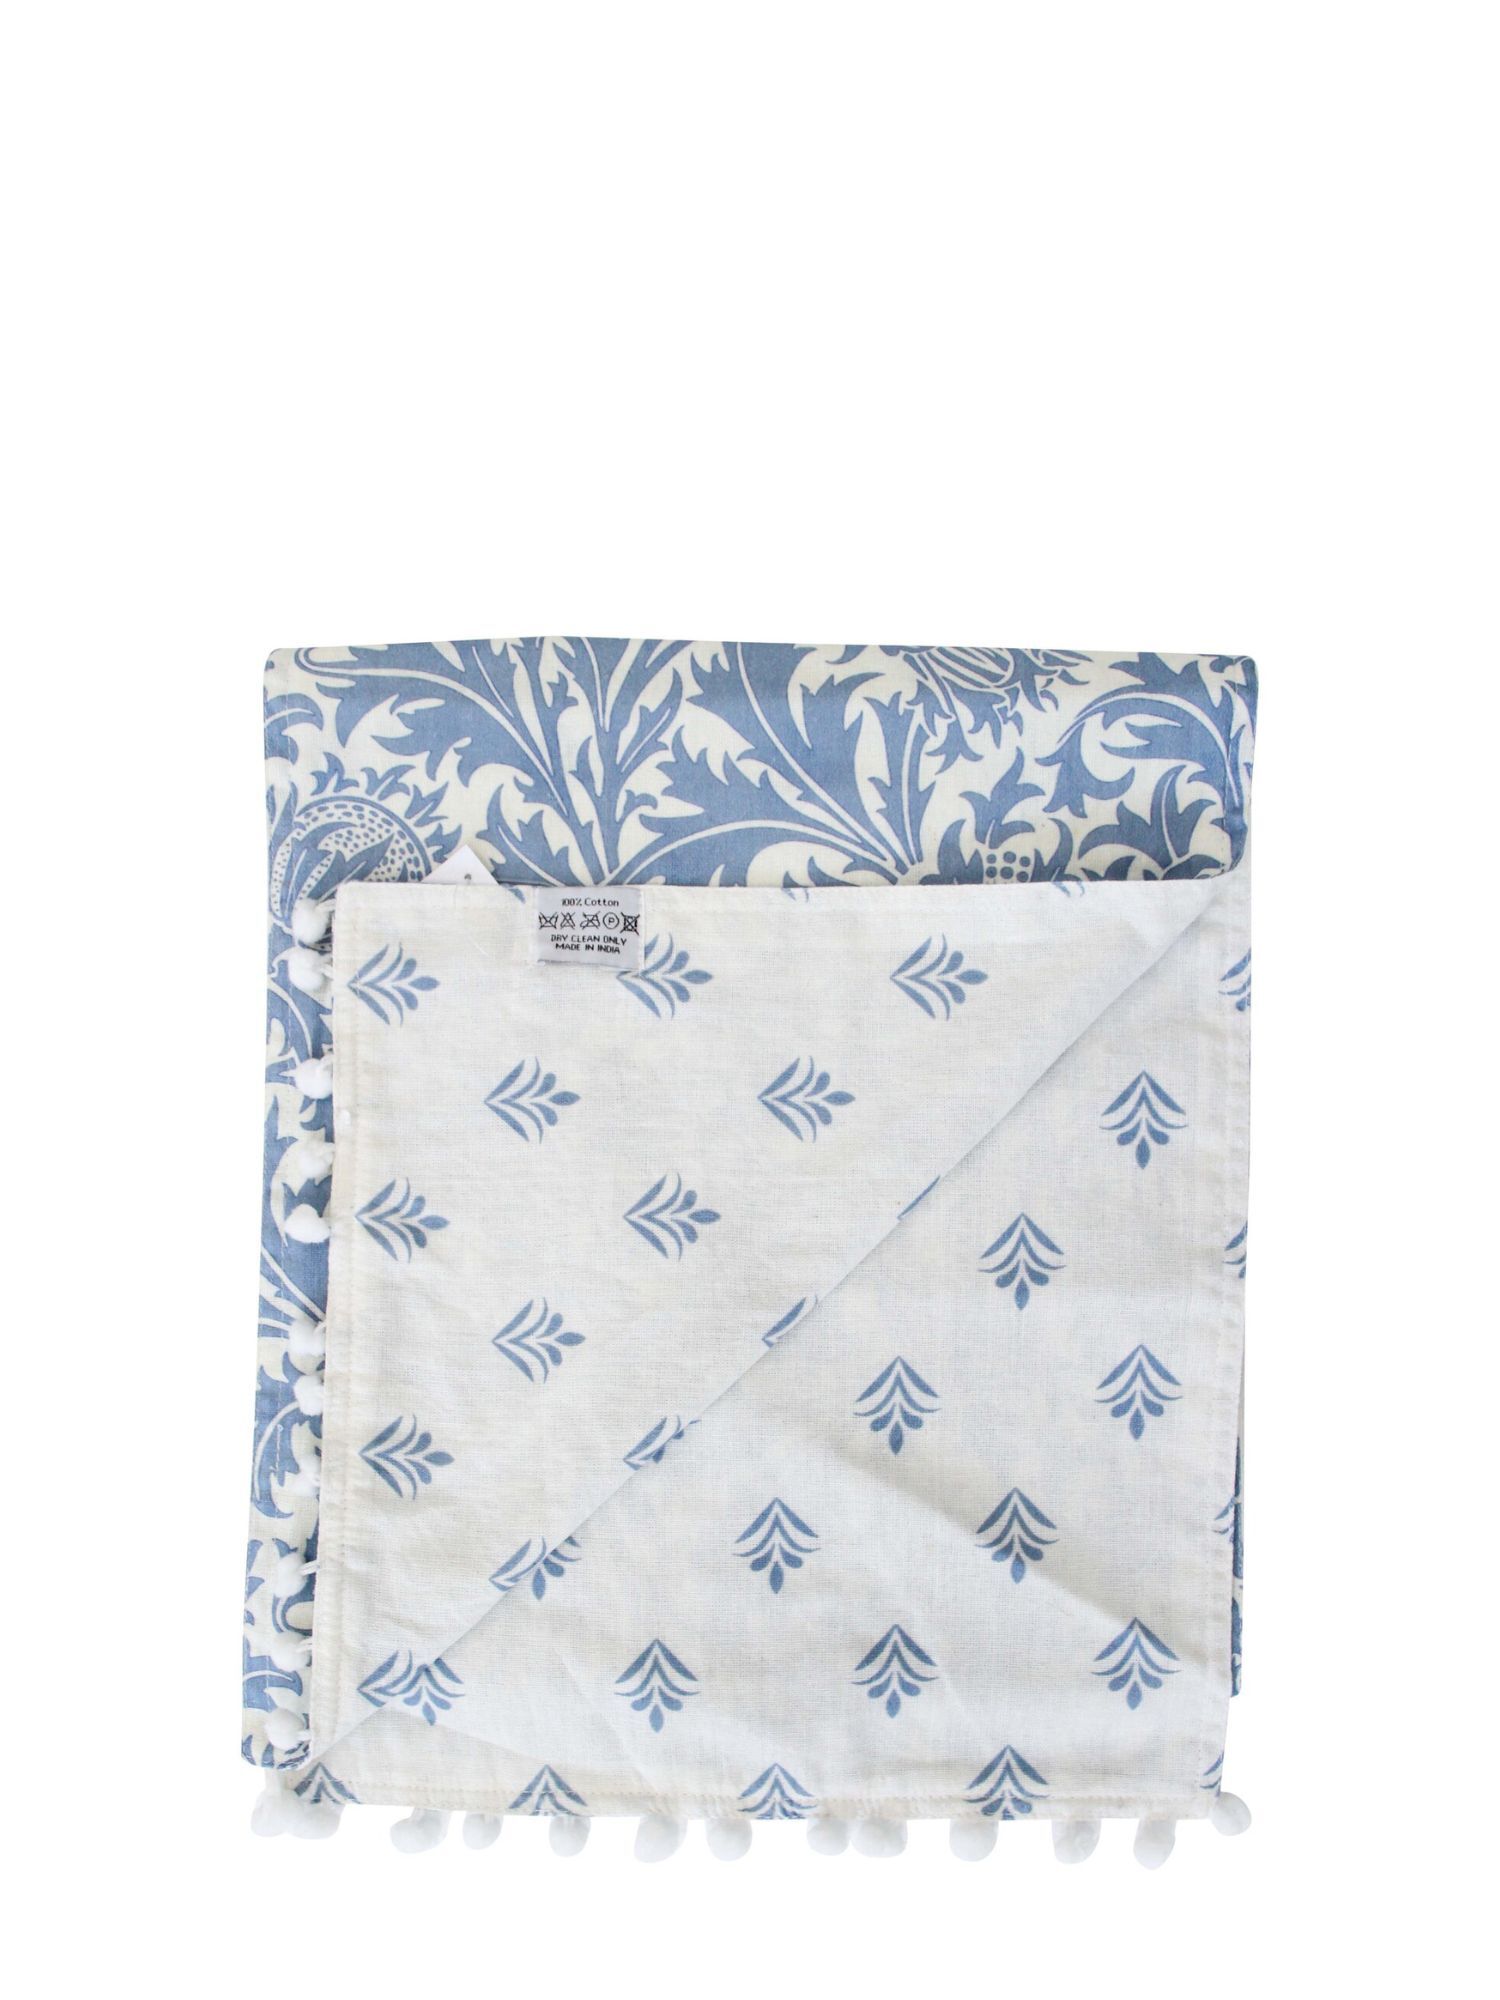 French Blue and White 135cmx30cm Cotton Table Runner